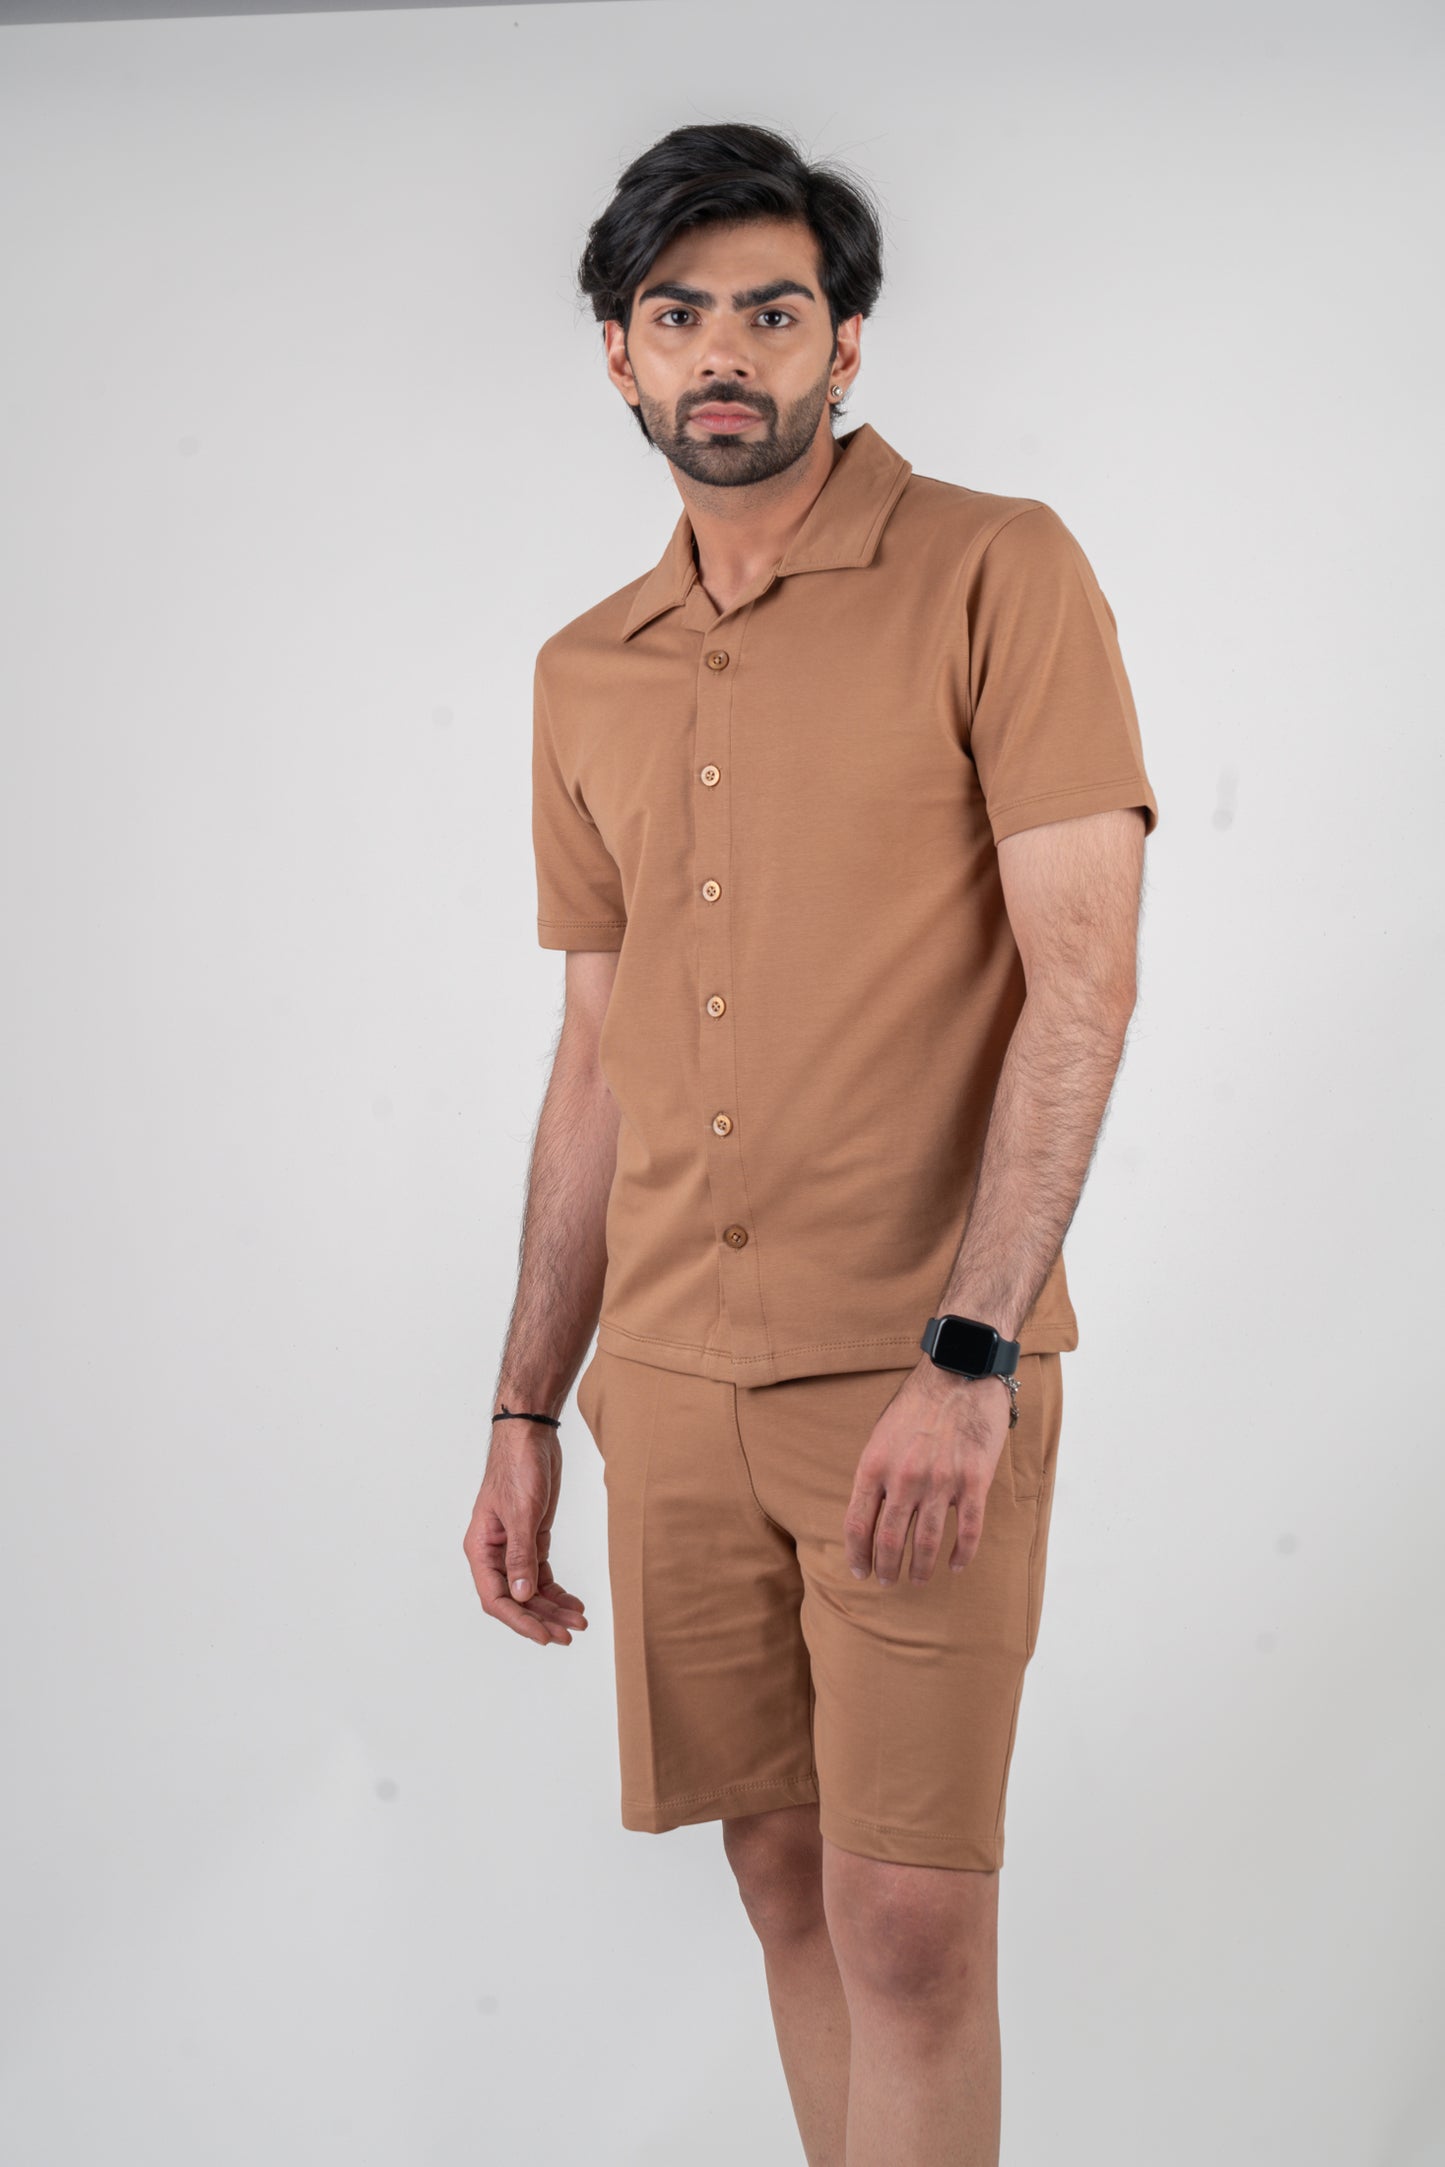 Coffee Shirt & Shorts Co-Ords For Men